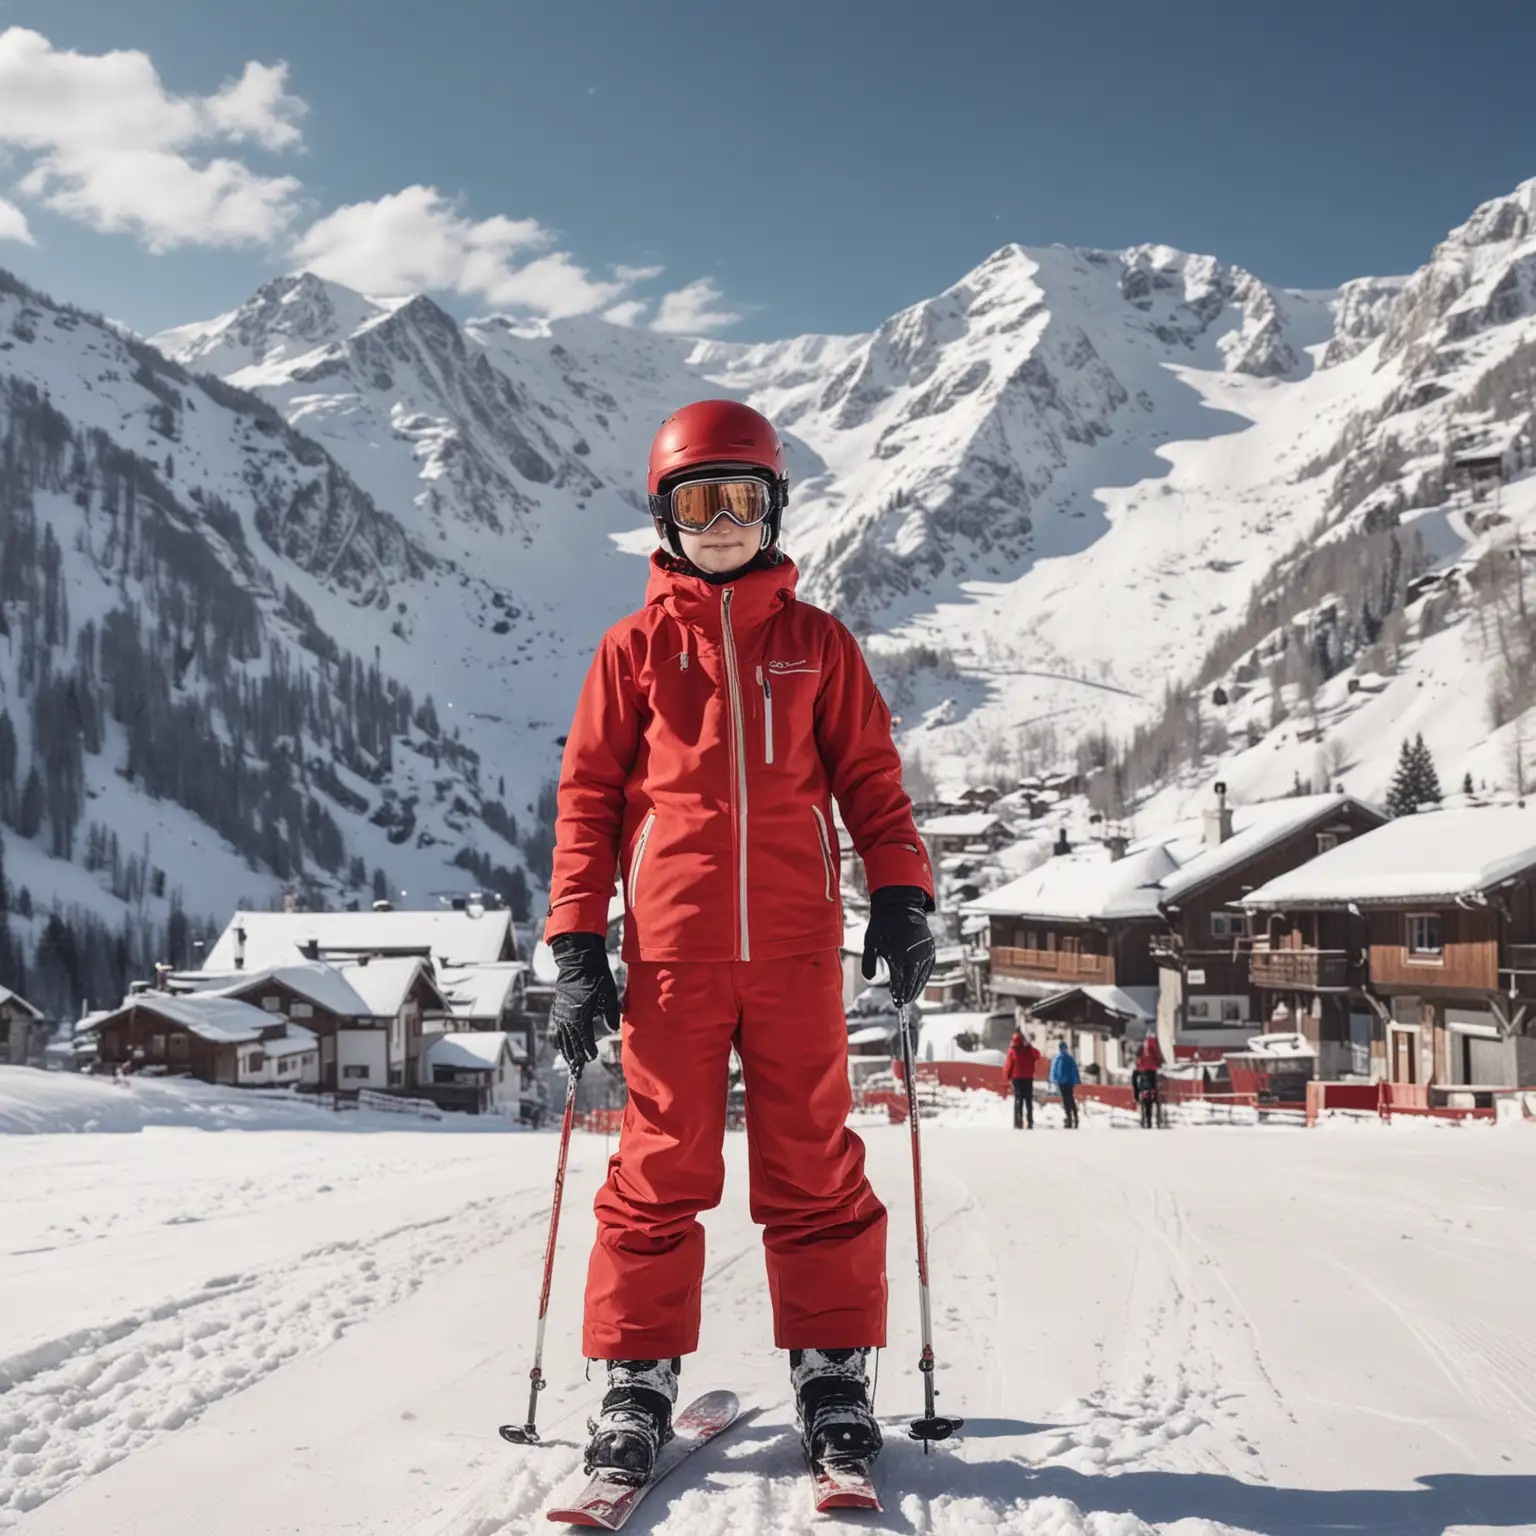 generate a skiing boy, who wears a red suit, and take a white hamlet, background is a snow mountain